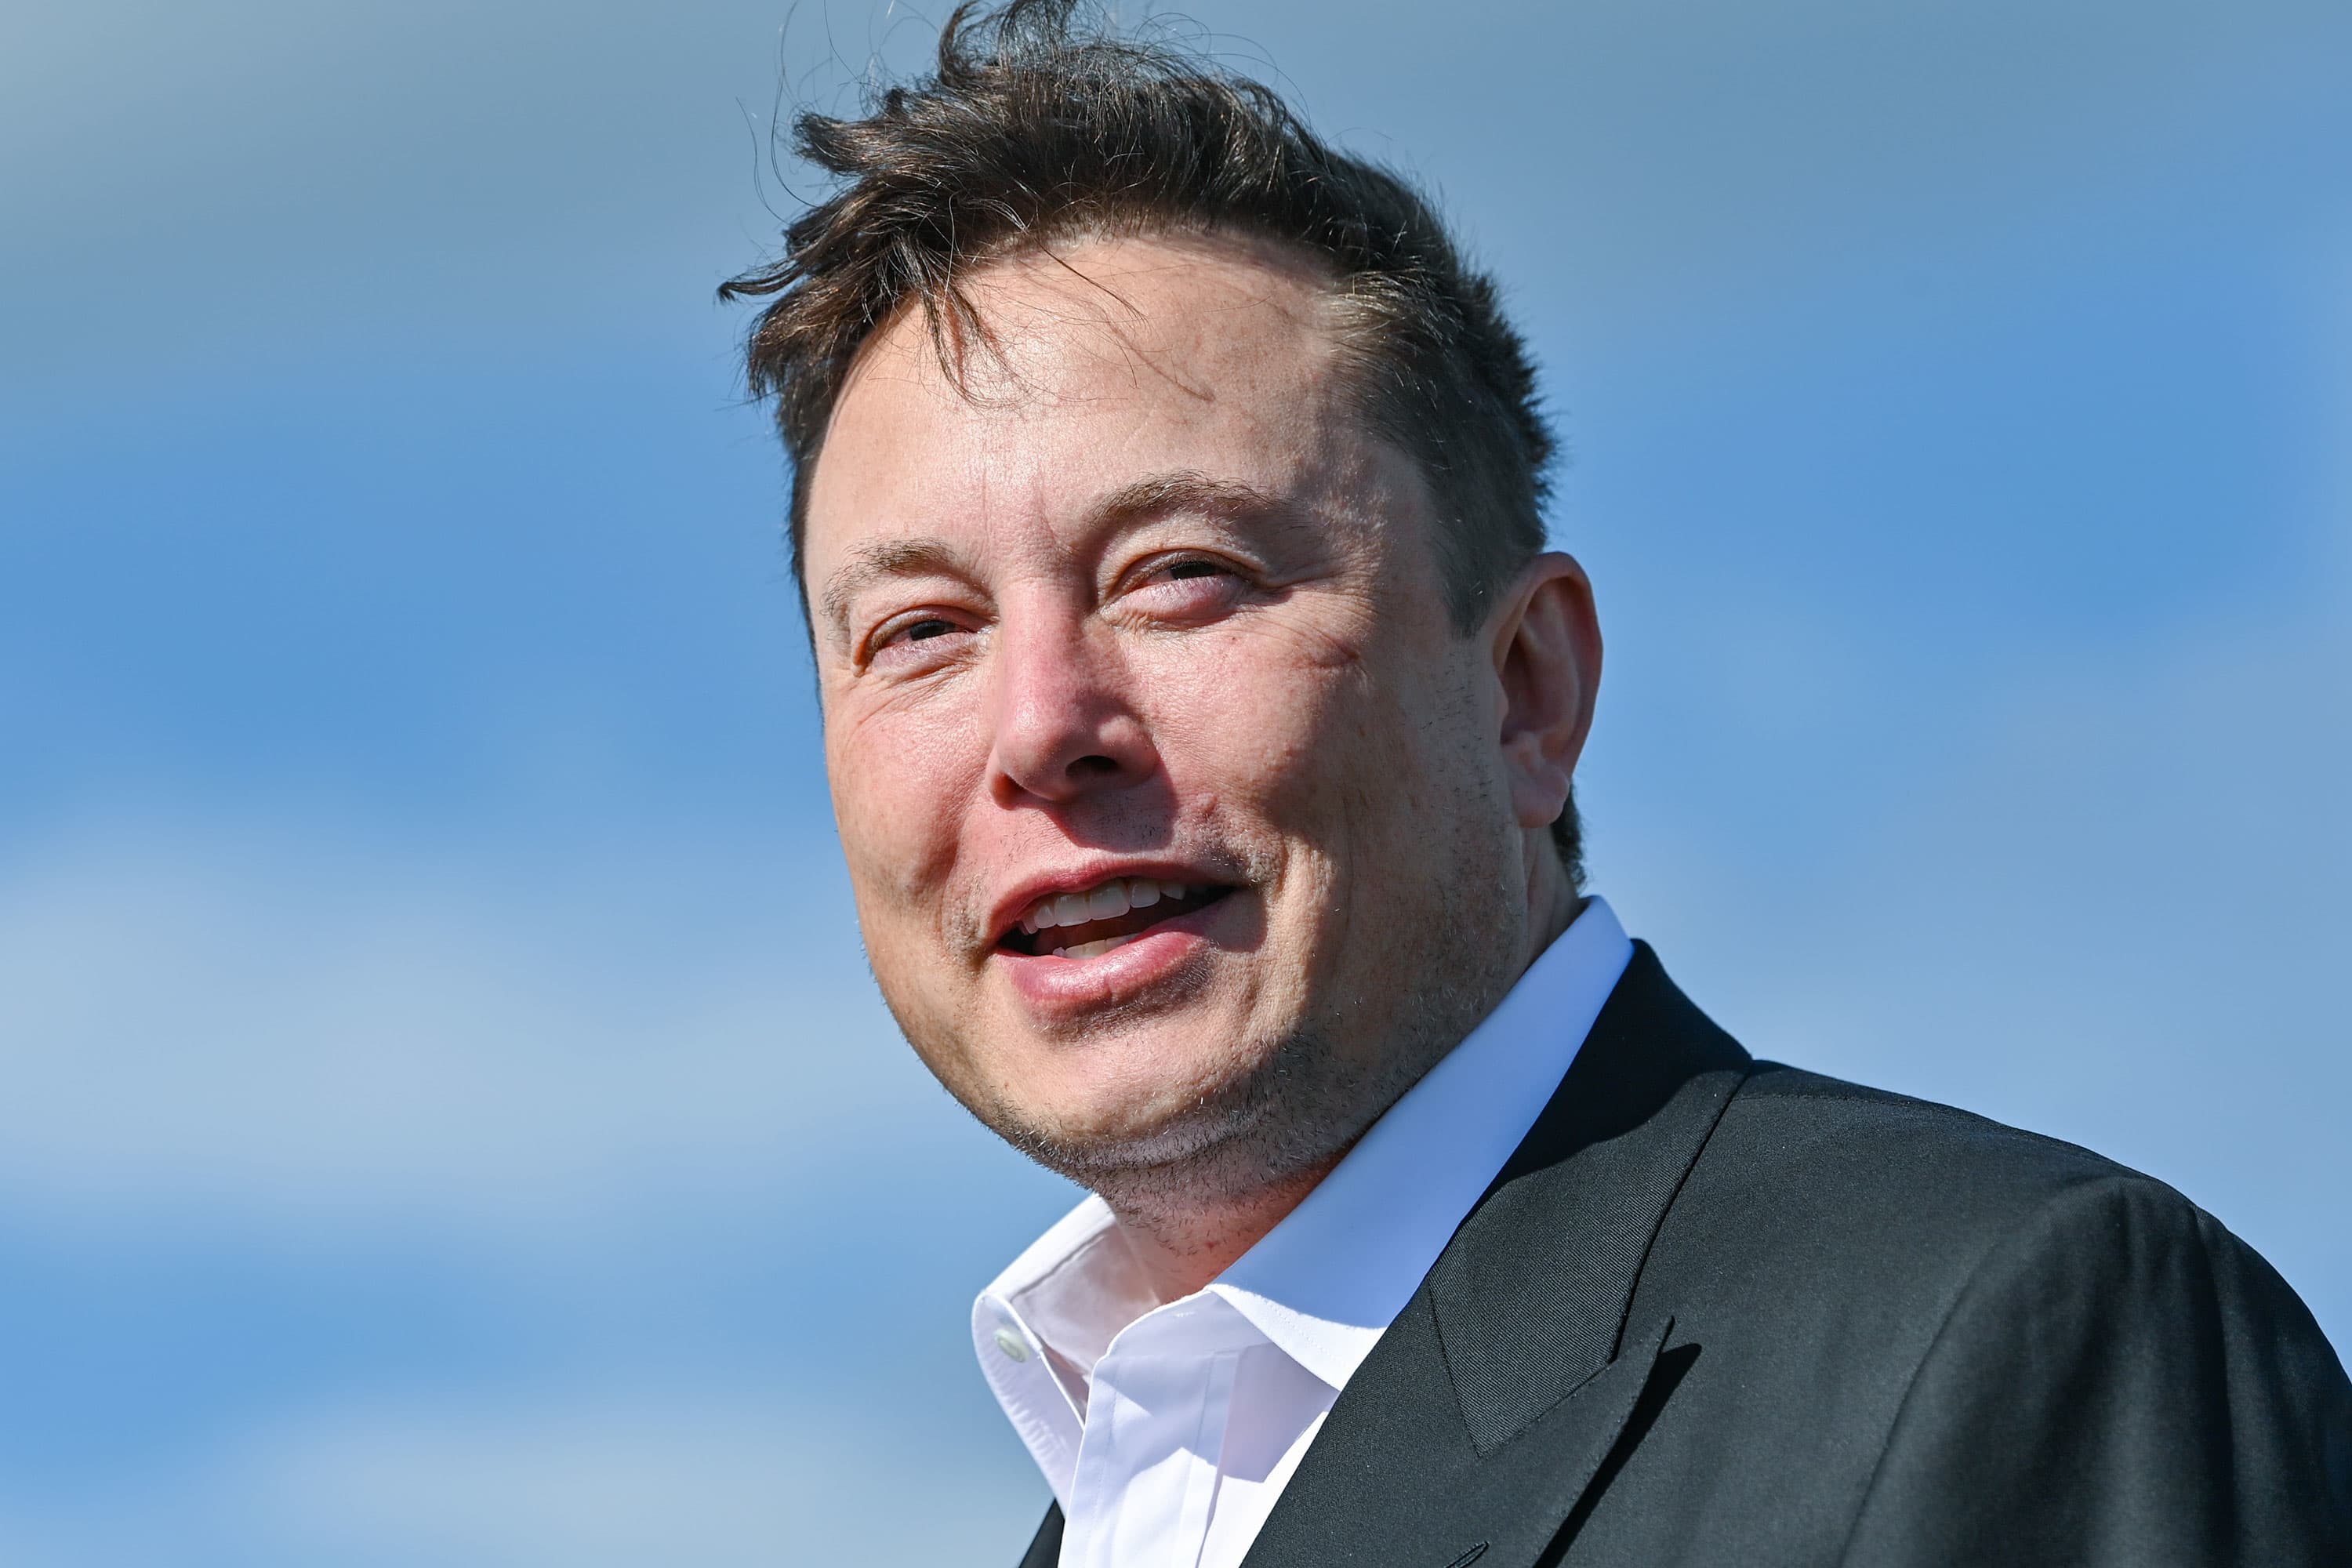 Cramer: Optimistic young investors see Elon Musk as next Steve Jobs, take Tesla to dizzying heights